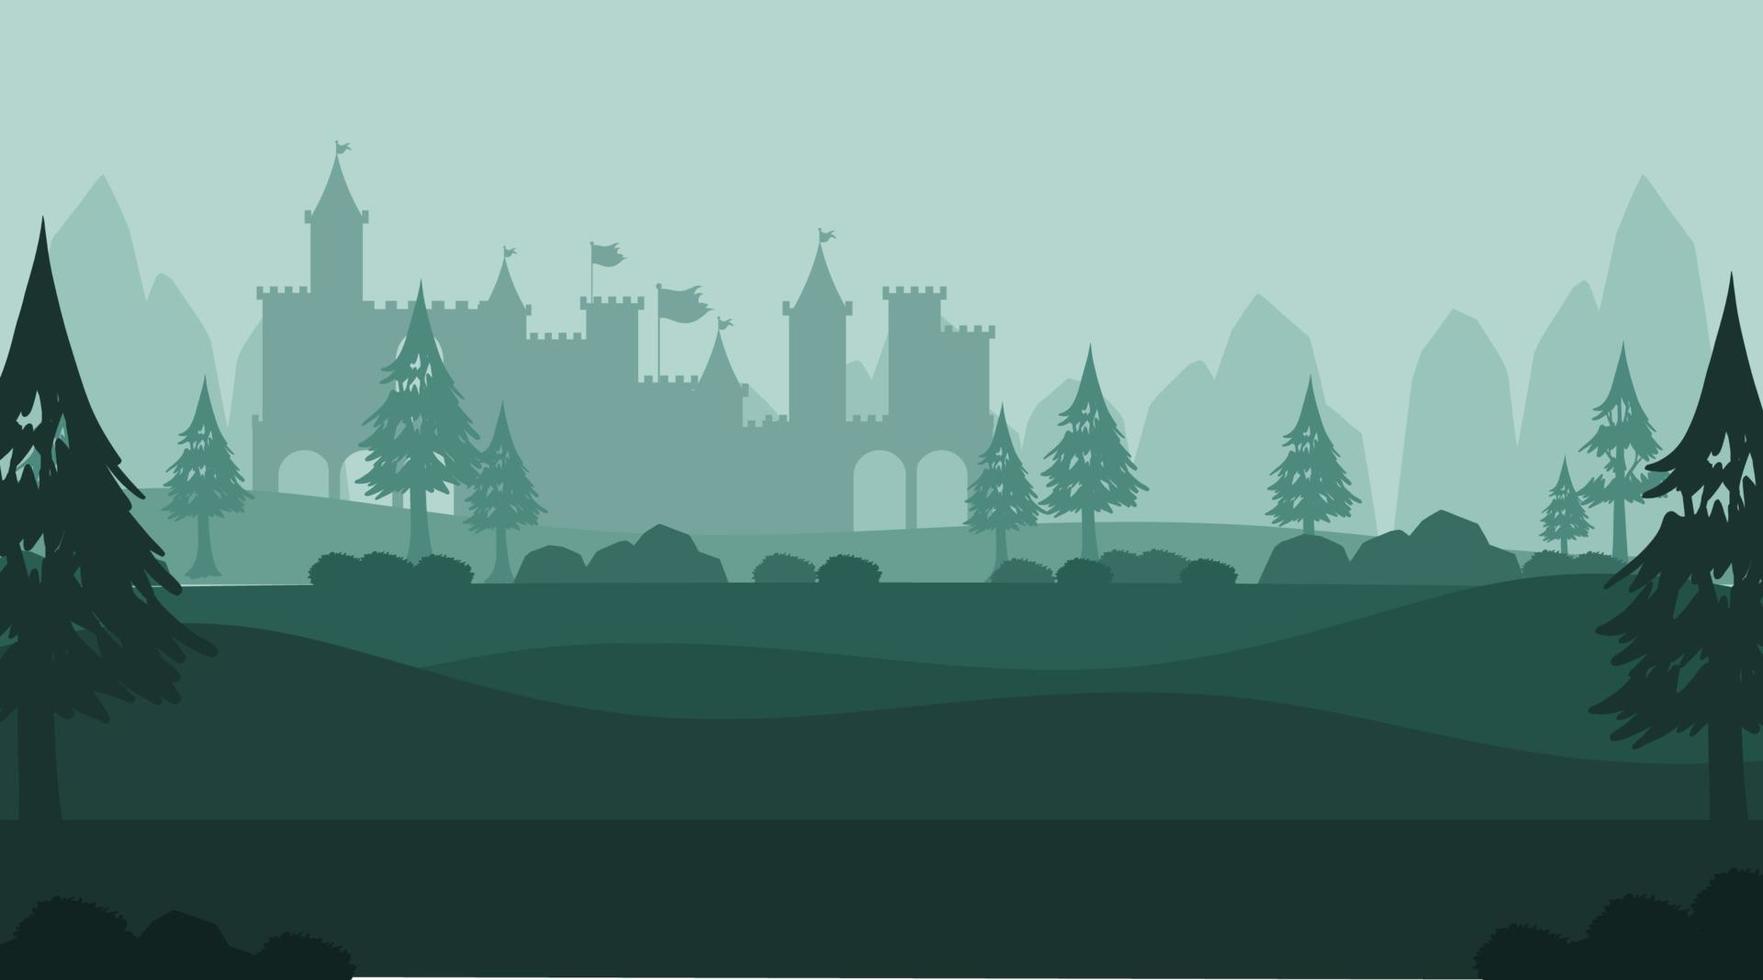 Empty silhouette medieval background vector